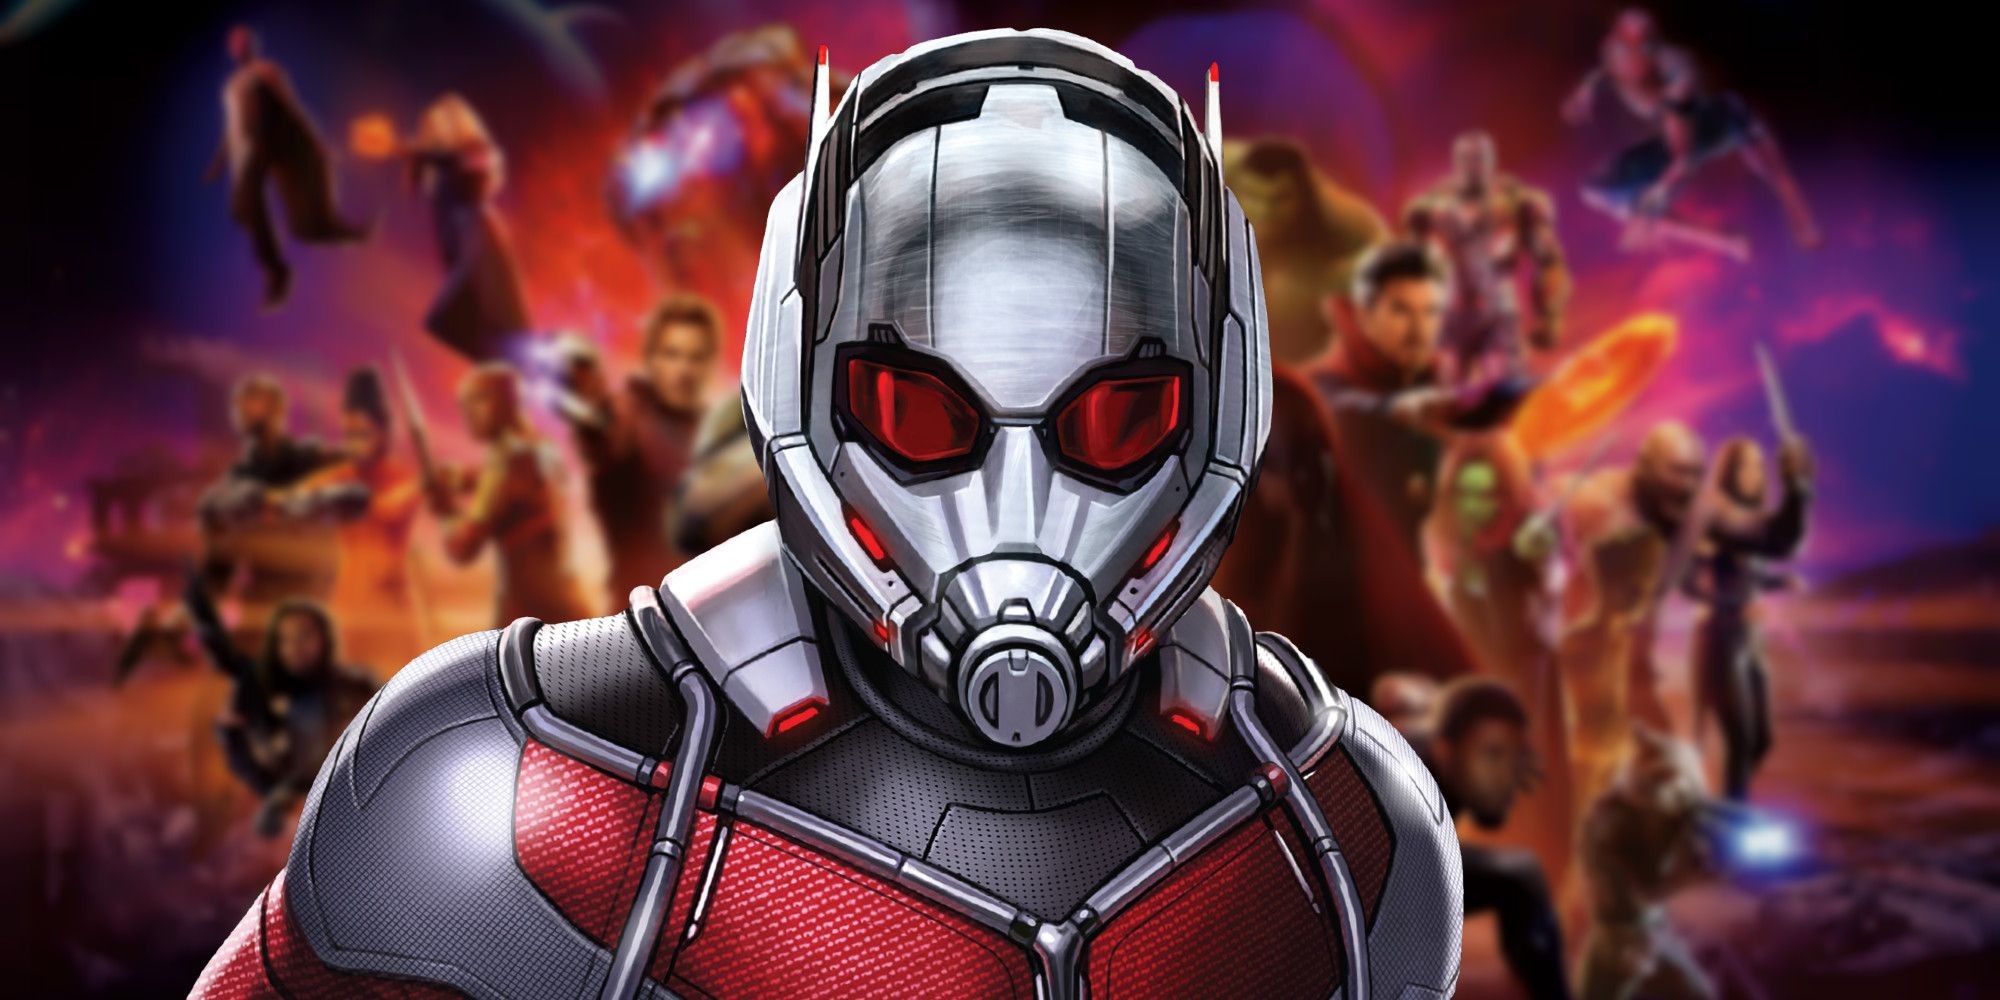 Ant-Man & the Wasp Trailer Sets Up New Avengers 4 Hero